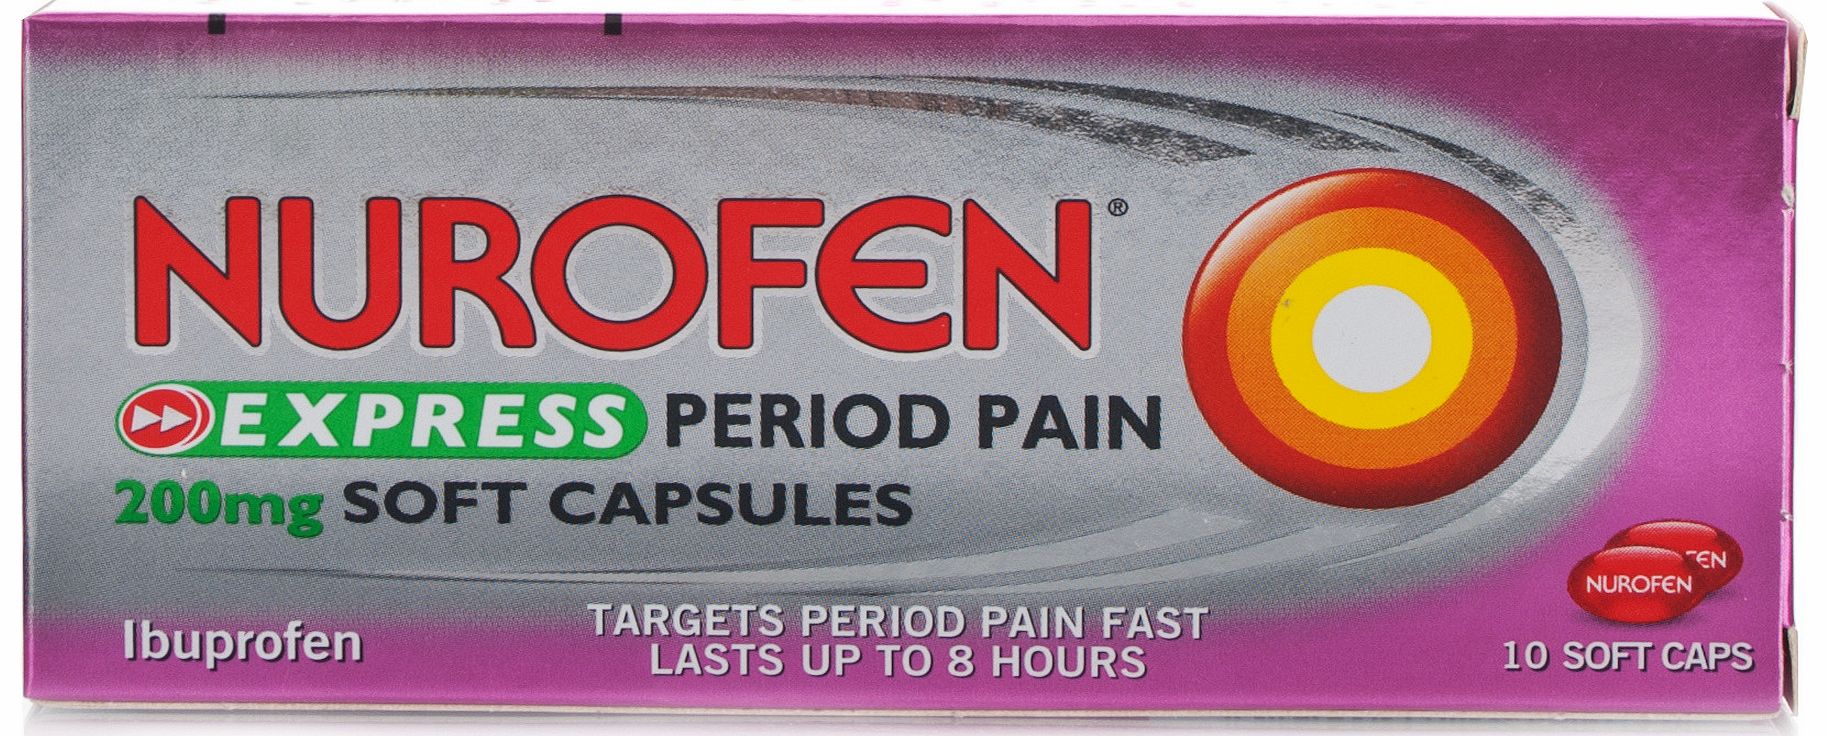 Express Period Pain 200mg Soft Capsules